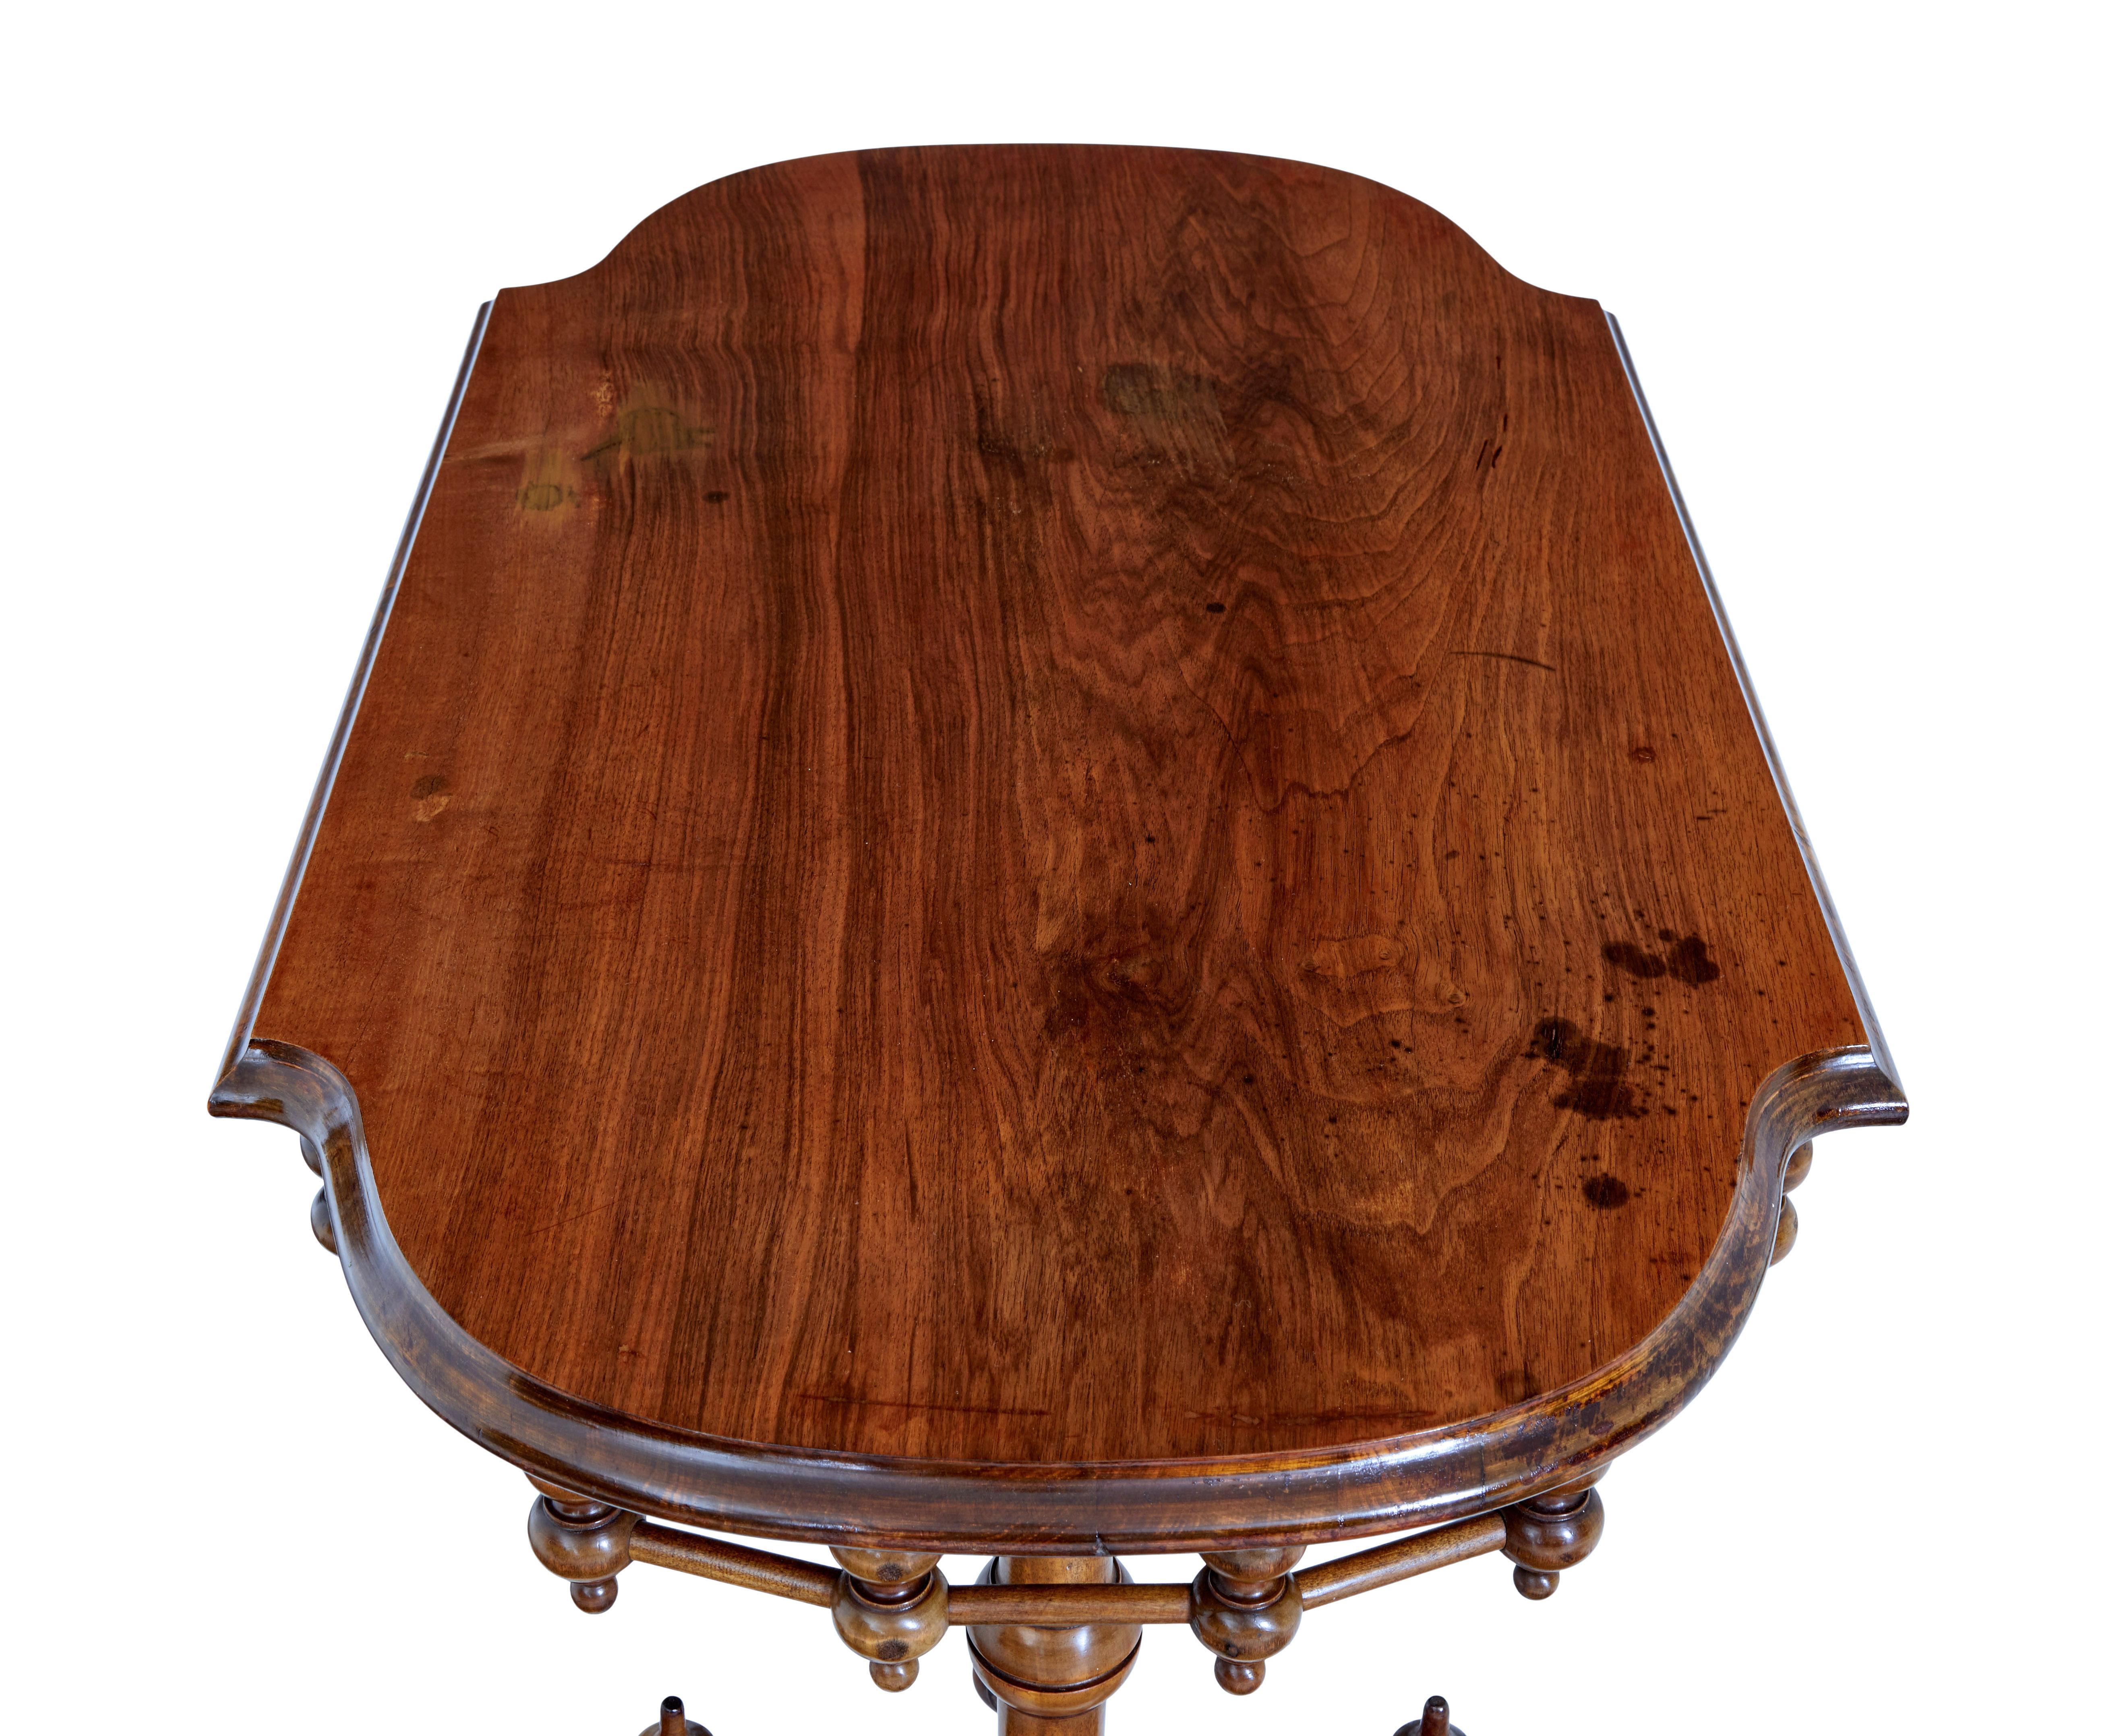 Hand-Crafted 19th Century Aesthetic Movement Walnut Table